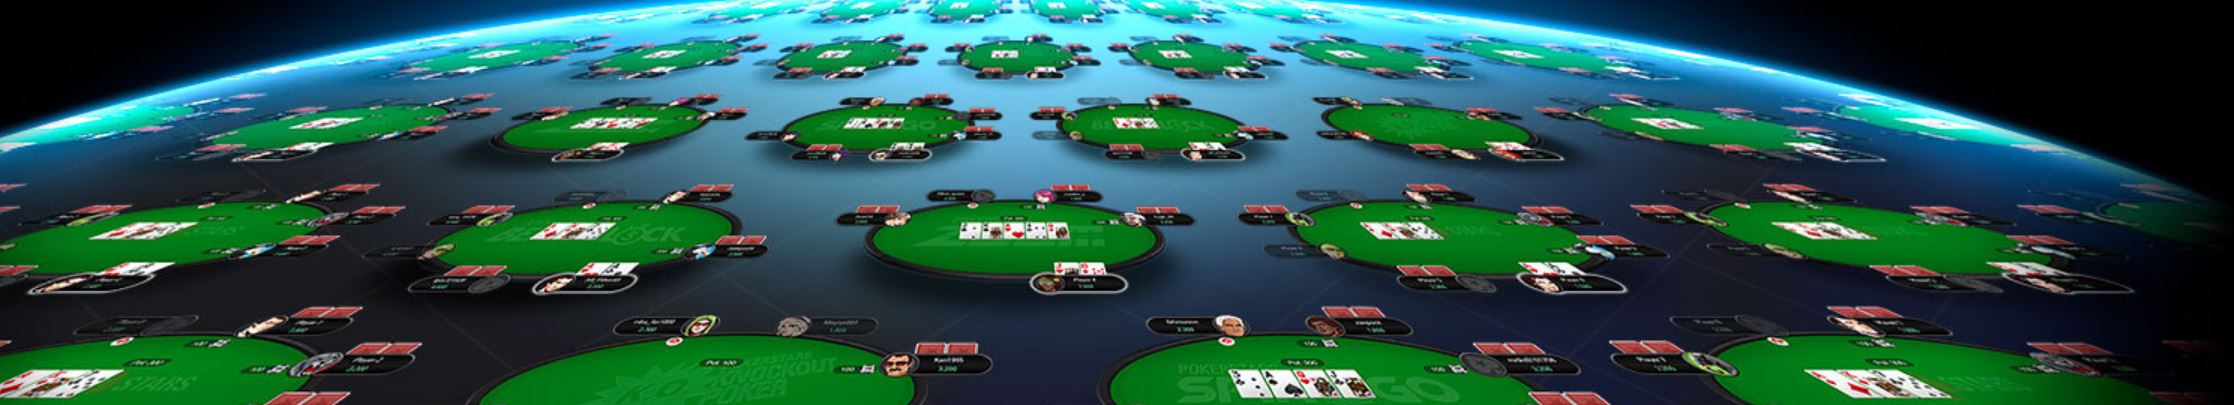 There are many types of gambling tournaments in online casinos.